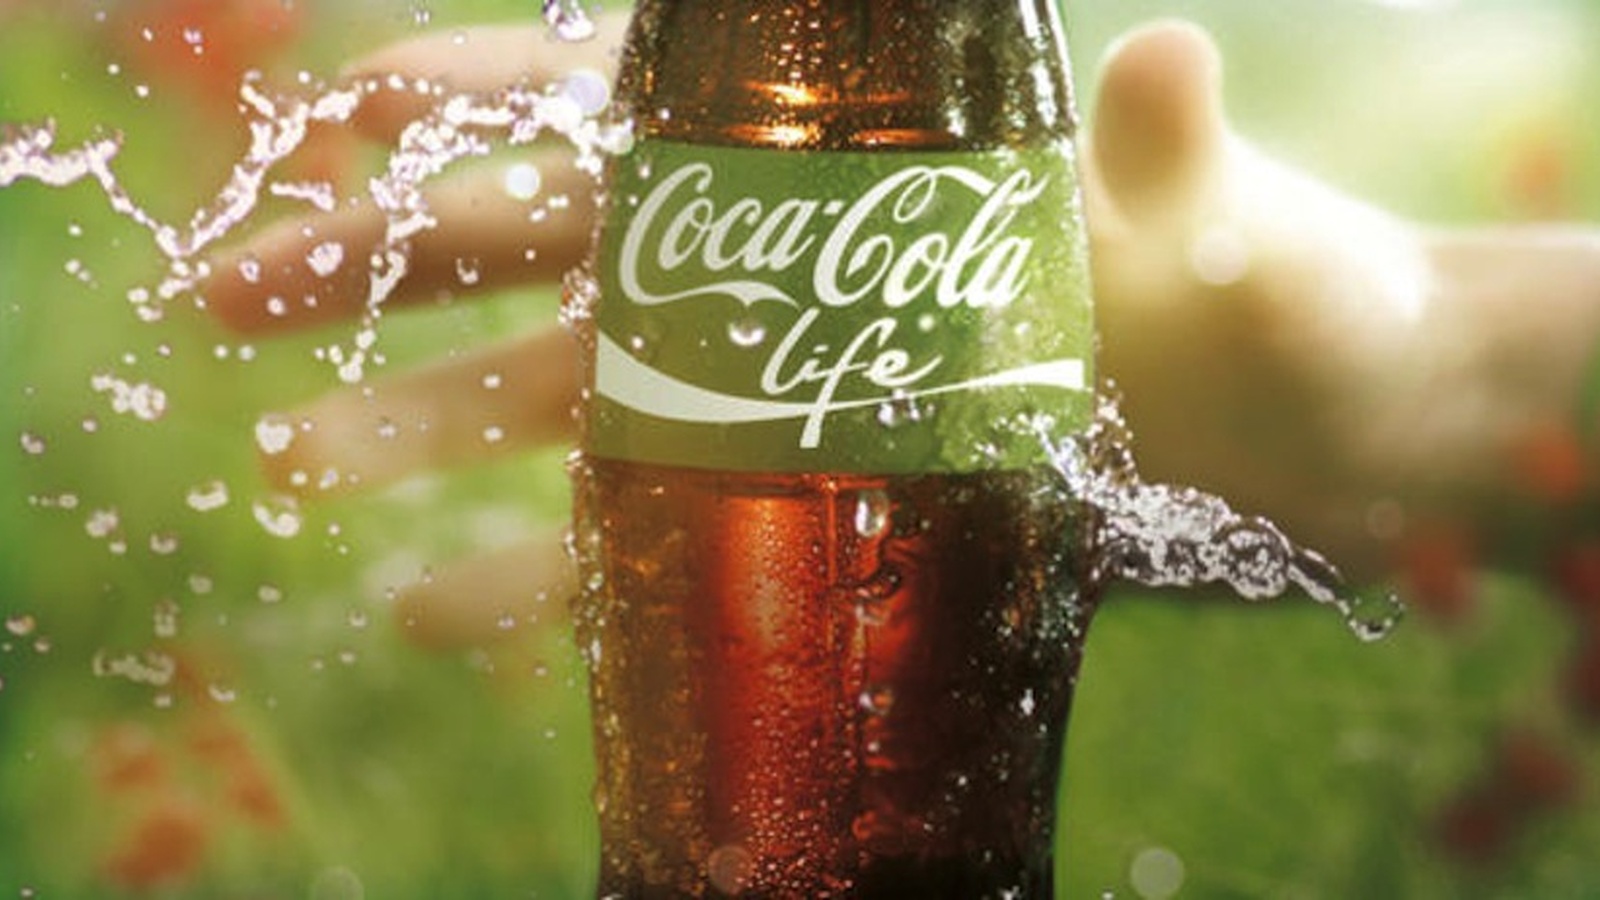 Coca Cola Life - Is it any better?